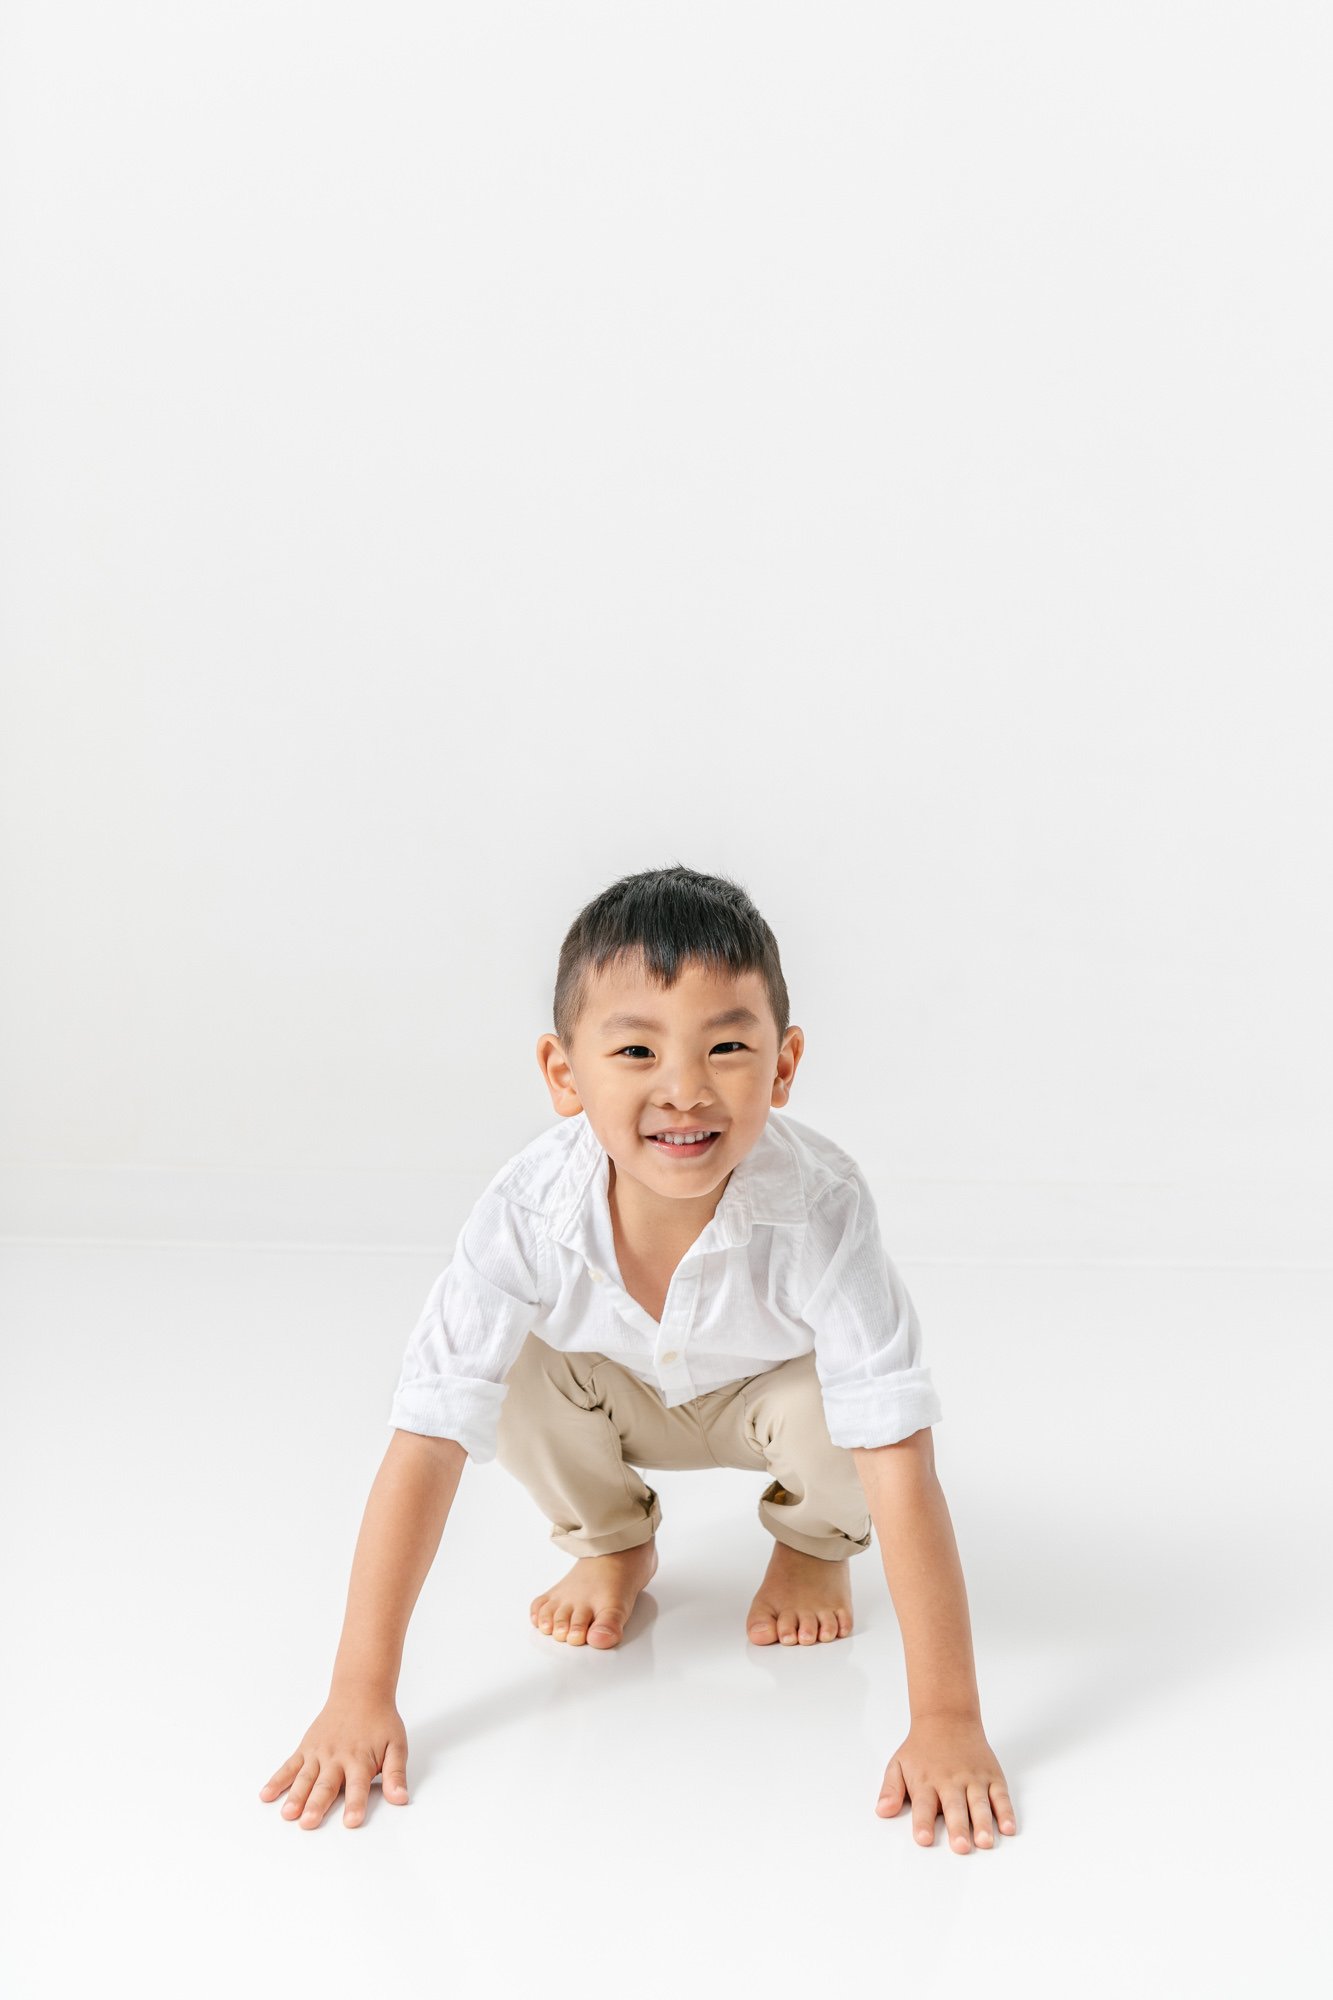    Young boy crouches down and touches the ground with a huge grin during studio photo session with Nicole Hawkins Photography. Family portraits in New Jersey #studionewborns #studioportraits #babystudioportraits #NewJerseyPhotographers #NJfamilyphot